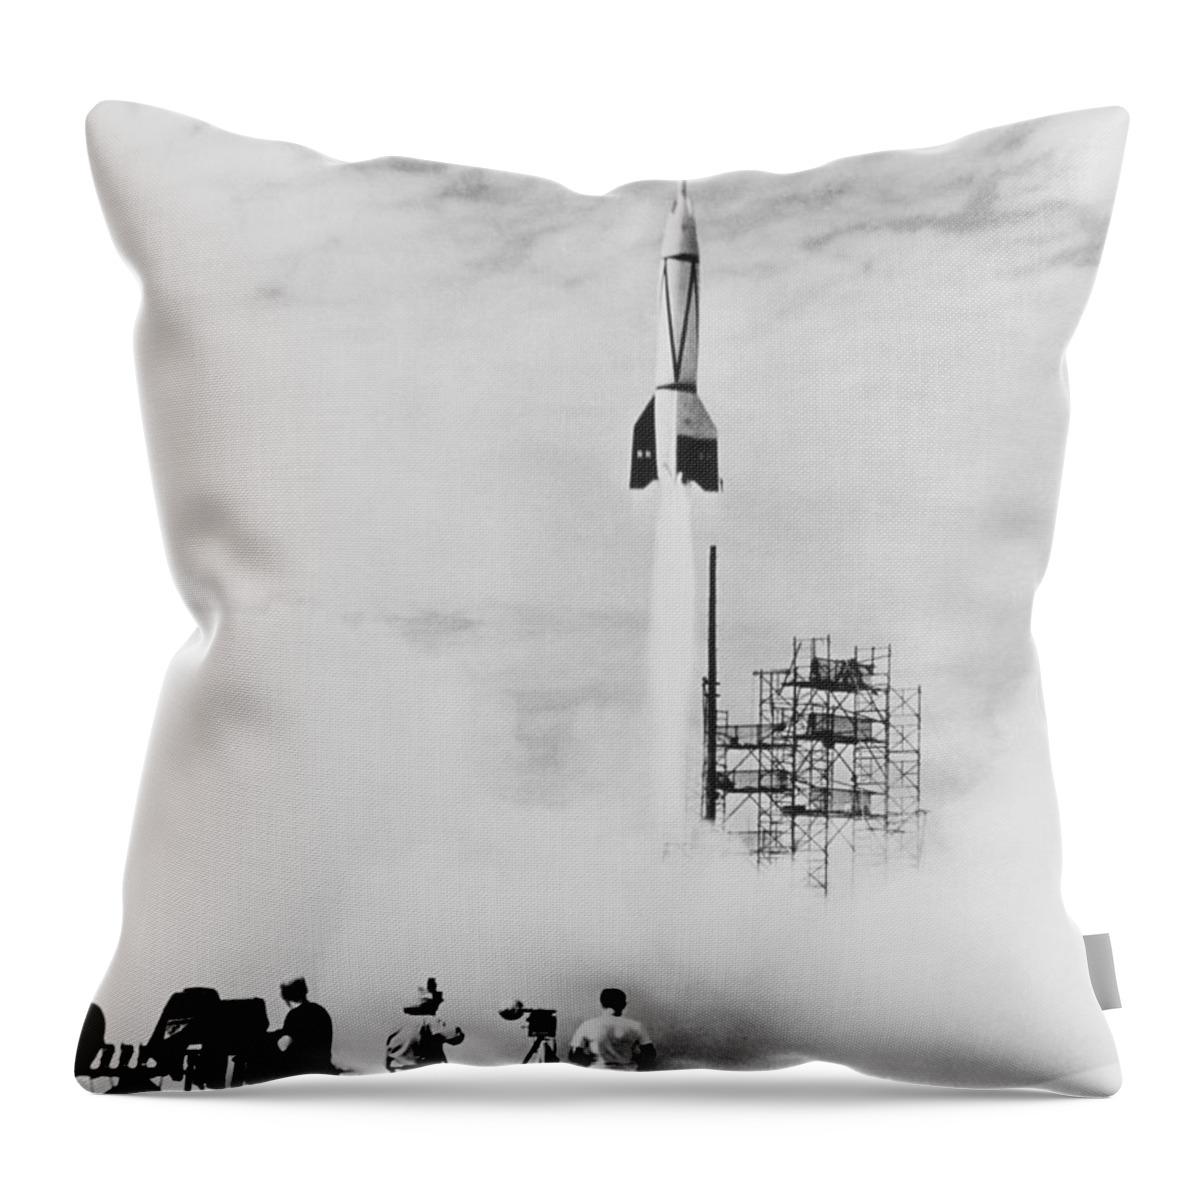 Transport Throw Pillow featuring the photograph First Cape Canaveral Launch by Science Source